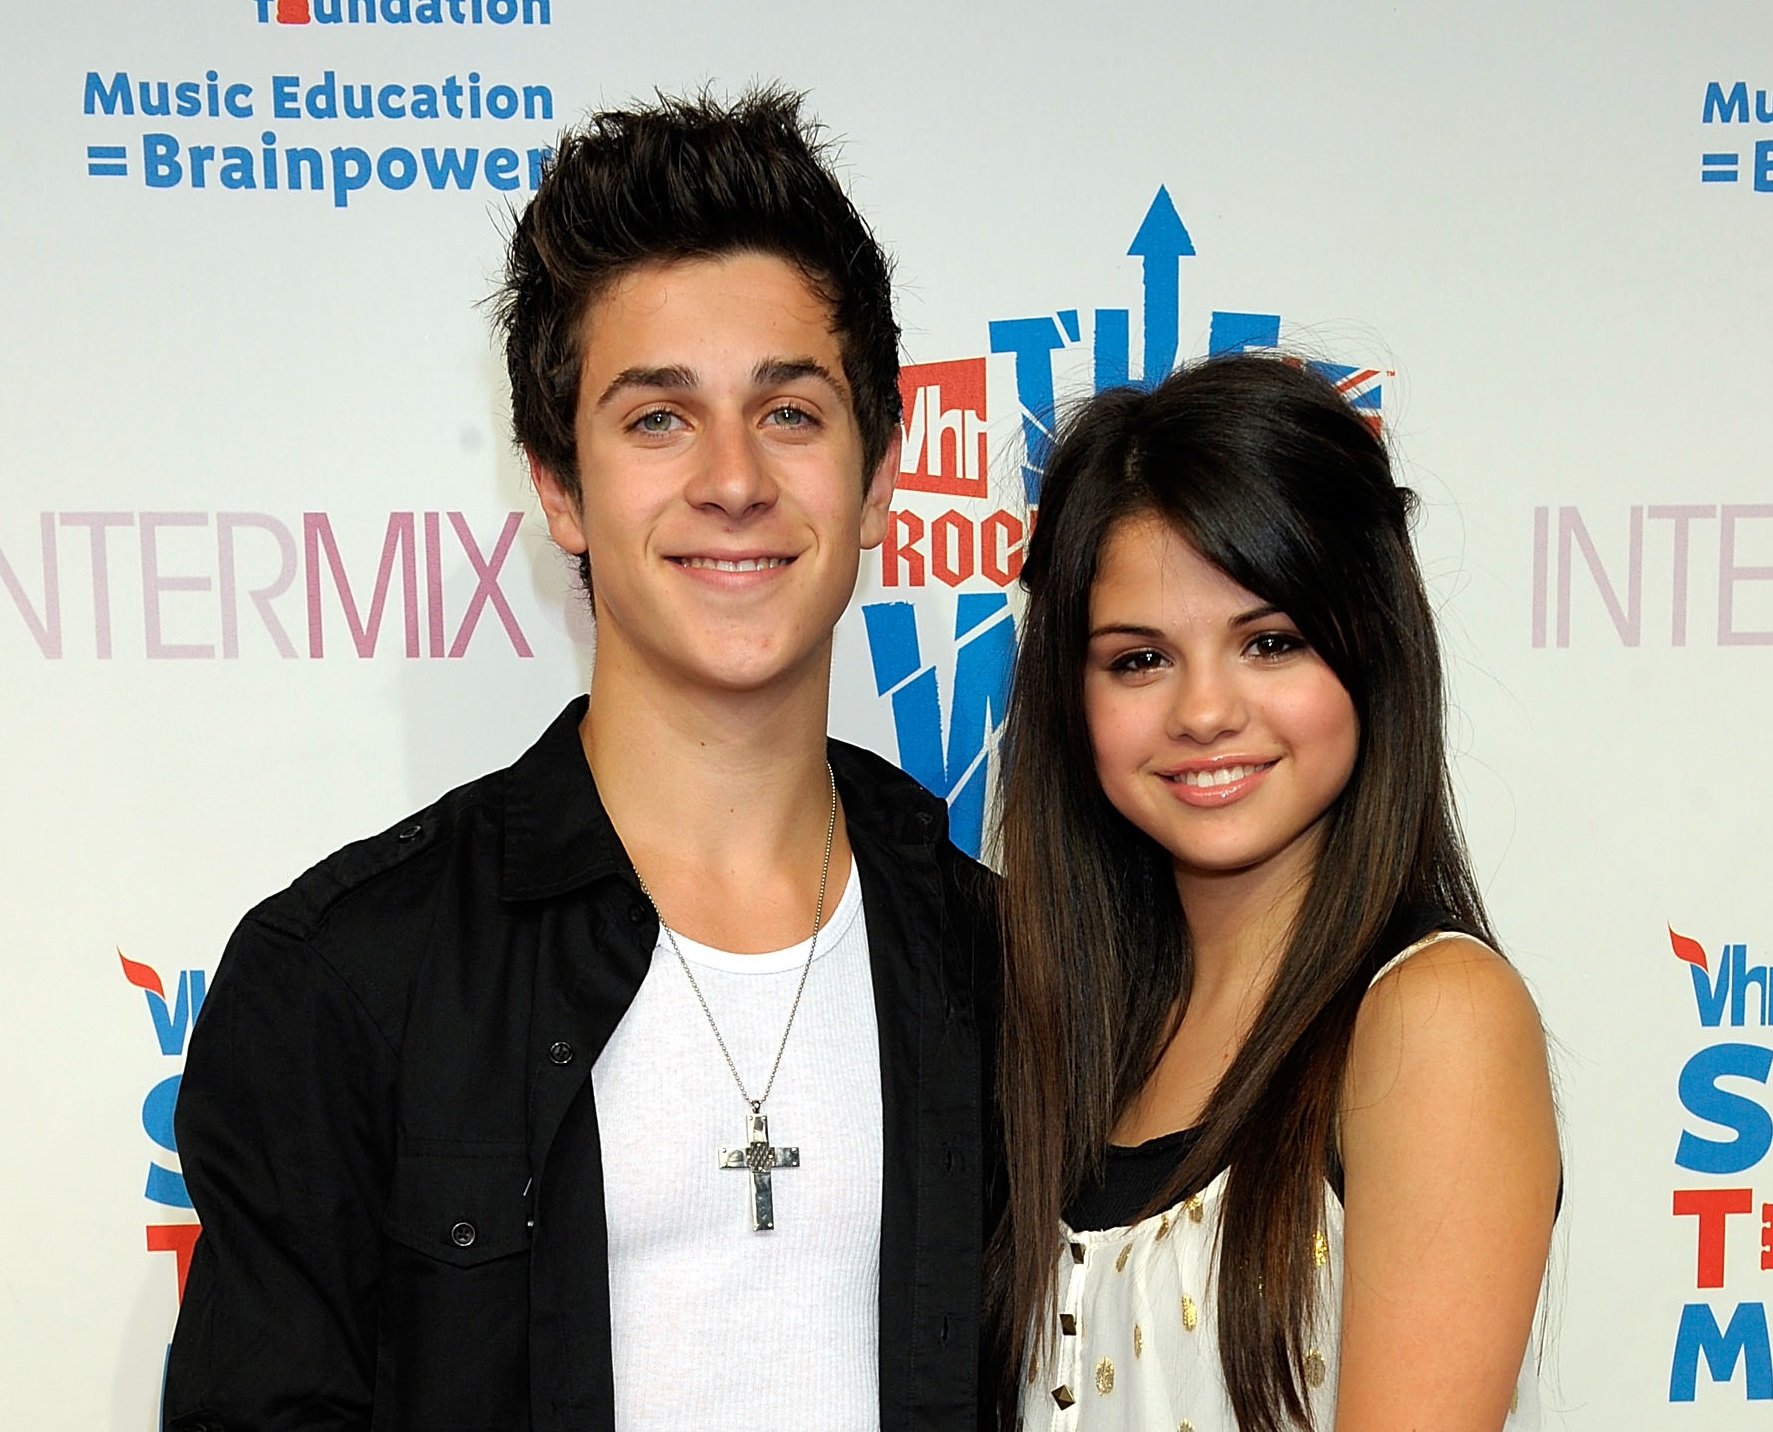 David Henrie and Selena Gomez attend Intermix's 3rd Annual 'VH1 Rock Honors' VIP Party at Intermix on July 11, 2008 in Los Angeles, California.